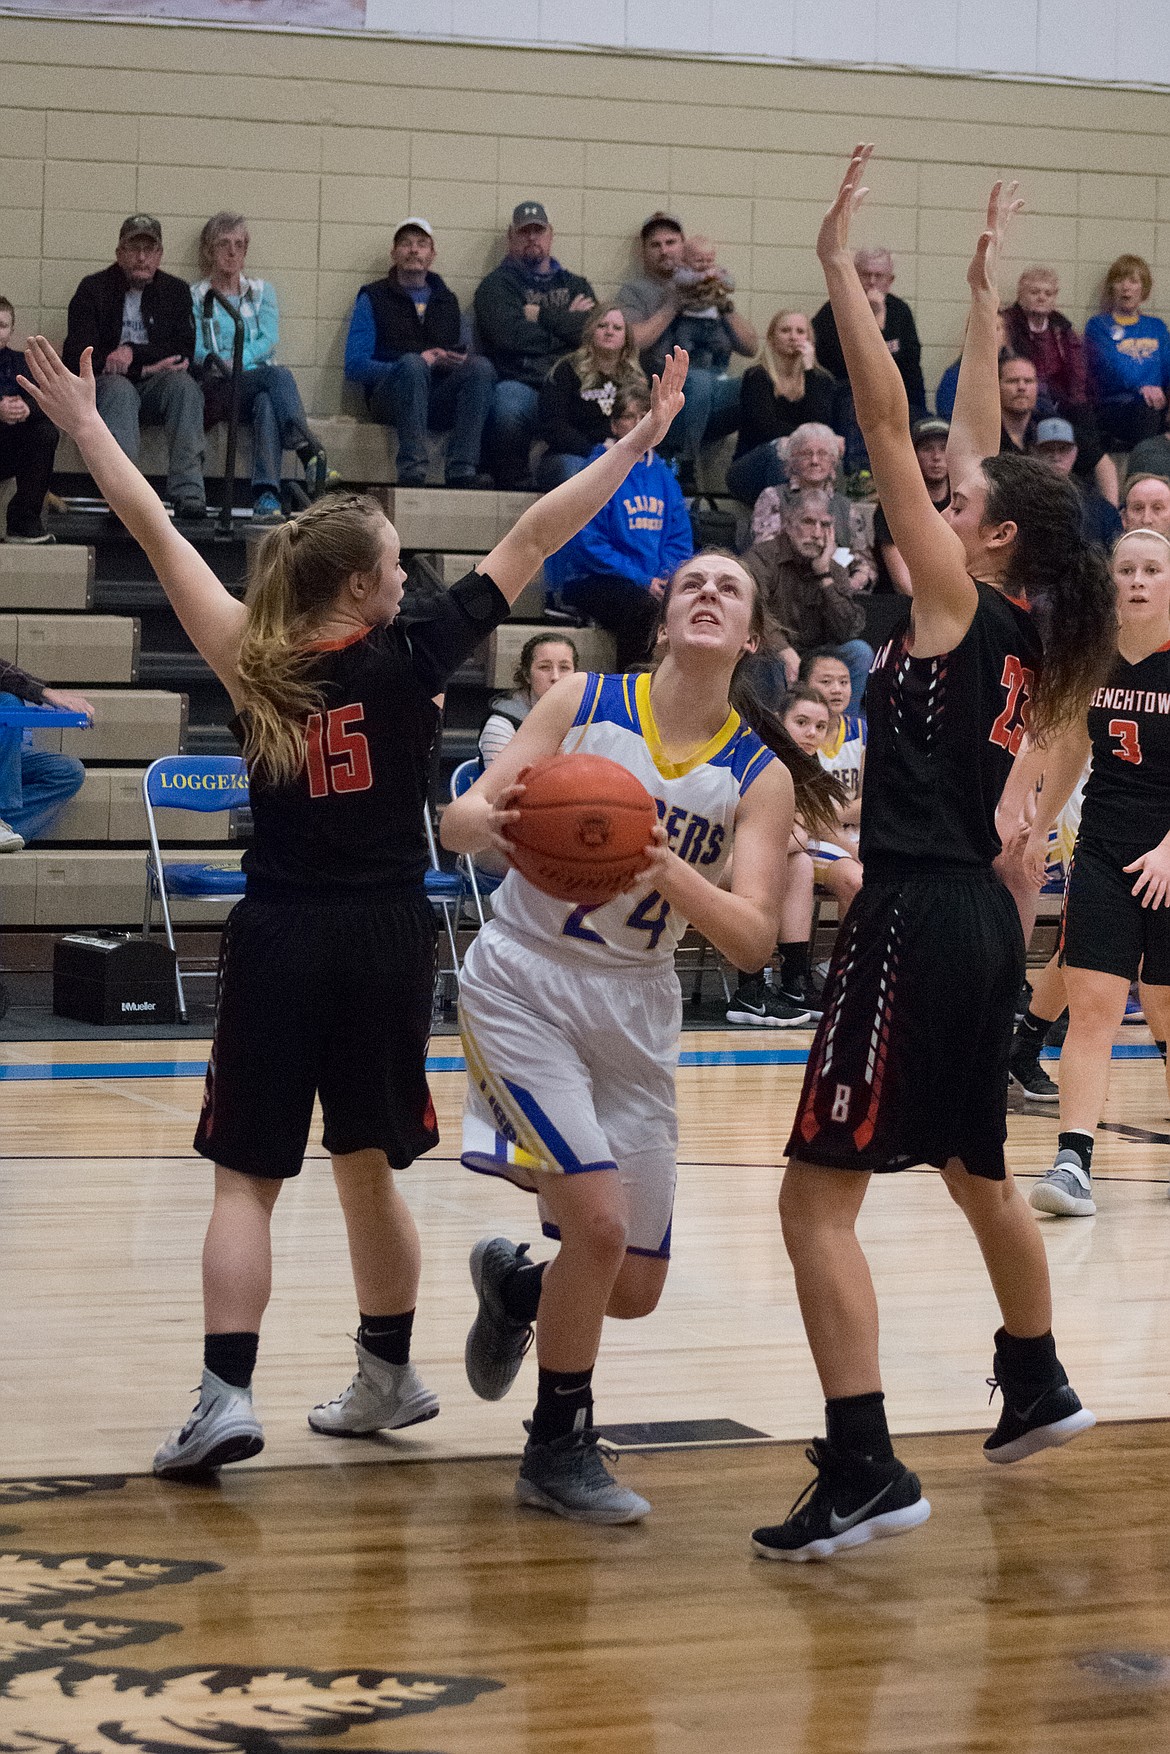 WIth 1:30 left in the game, Libby&#146;s Jayden Winslow rolled right around Frenchtown&#146;s Callie Bagnell and dodged Syd Channer to score the only Lady Logger field goal of the second half. (Ben Kibbey/The Western News)